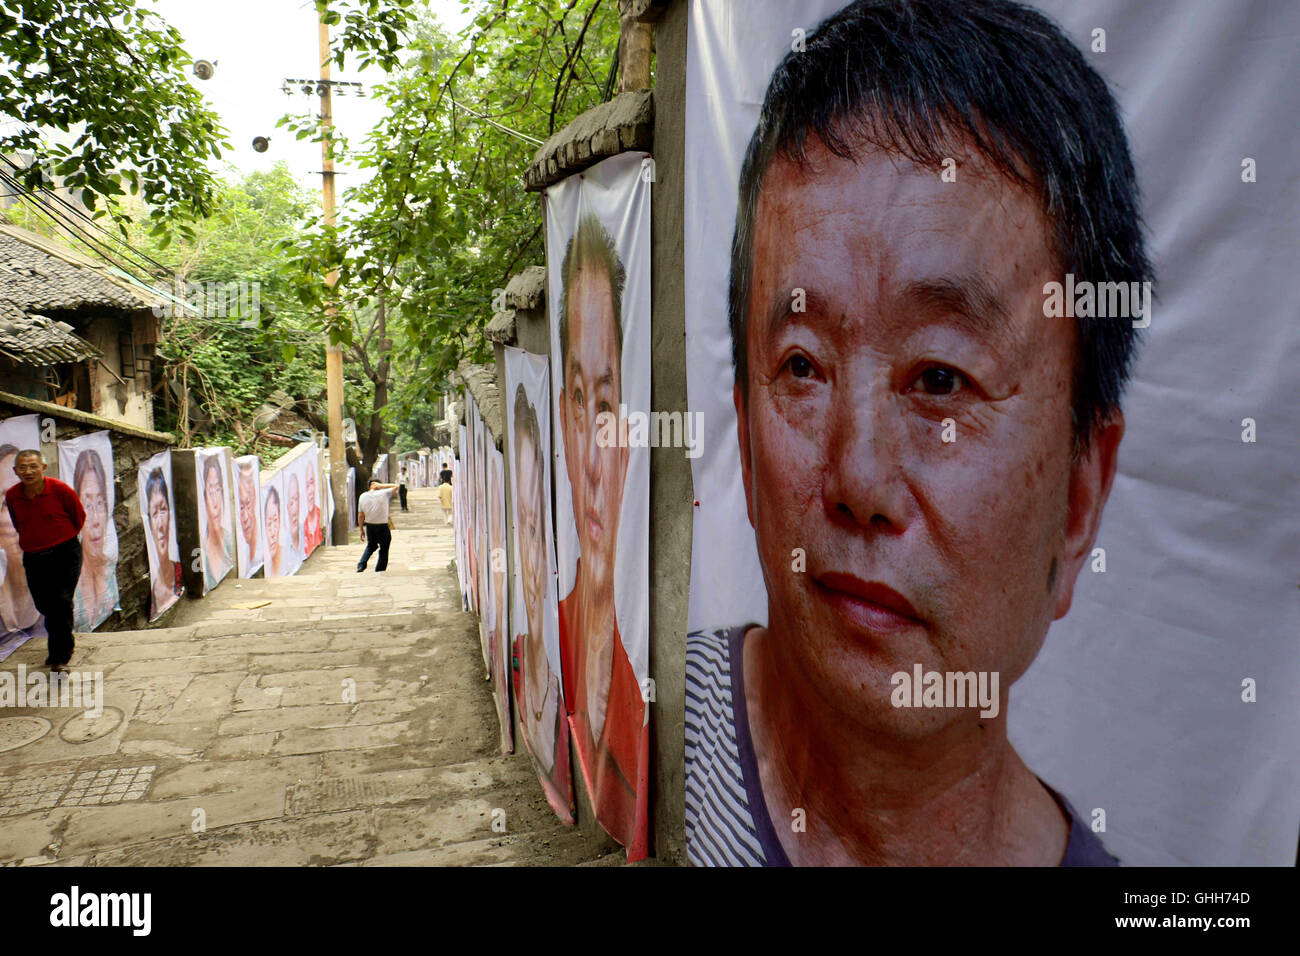 Chongqing, Chongqing, China. 27th Sep, 2016. Chongqing, CHINA-September 27 2016:?(EDITORIAL?USE?ONLY.?CHINA?OUT) More than 500 portraits of local residents of Eighteen Staircases Area are showed on the walls at the construction site in Yuzhong District, southwest ChinaÂ¡Â¯s Chongqing, September 27th, 2016. The Eighteen Staircases Area, an old area reflecting typical life of Chongqing People, started to be demolished and reconstructed in July, 2010, and now the reconstruction will be completed soon. The exhibition showcases the authentic Chongqing life of residents in the Eighteen Staircas Stock Photo